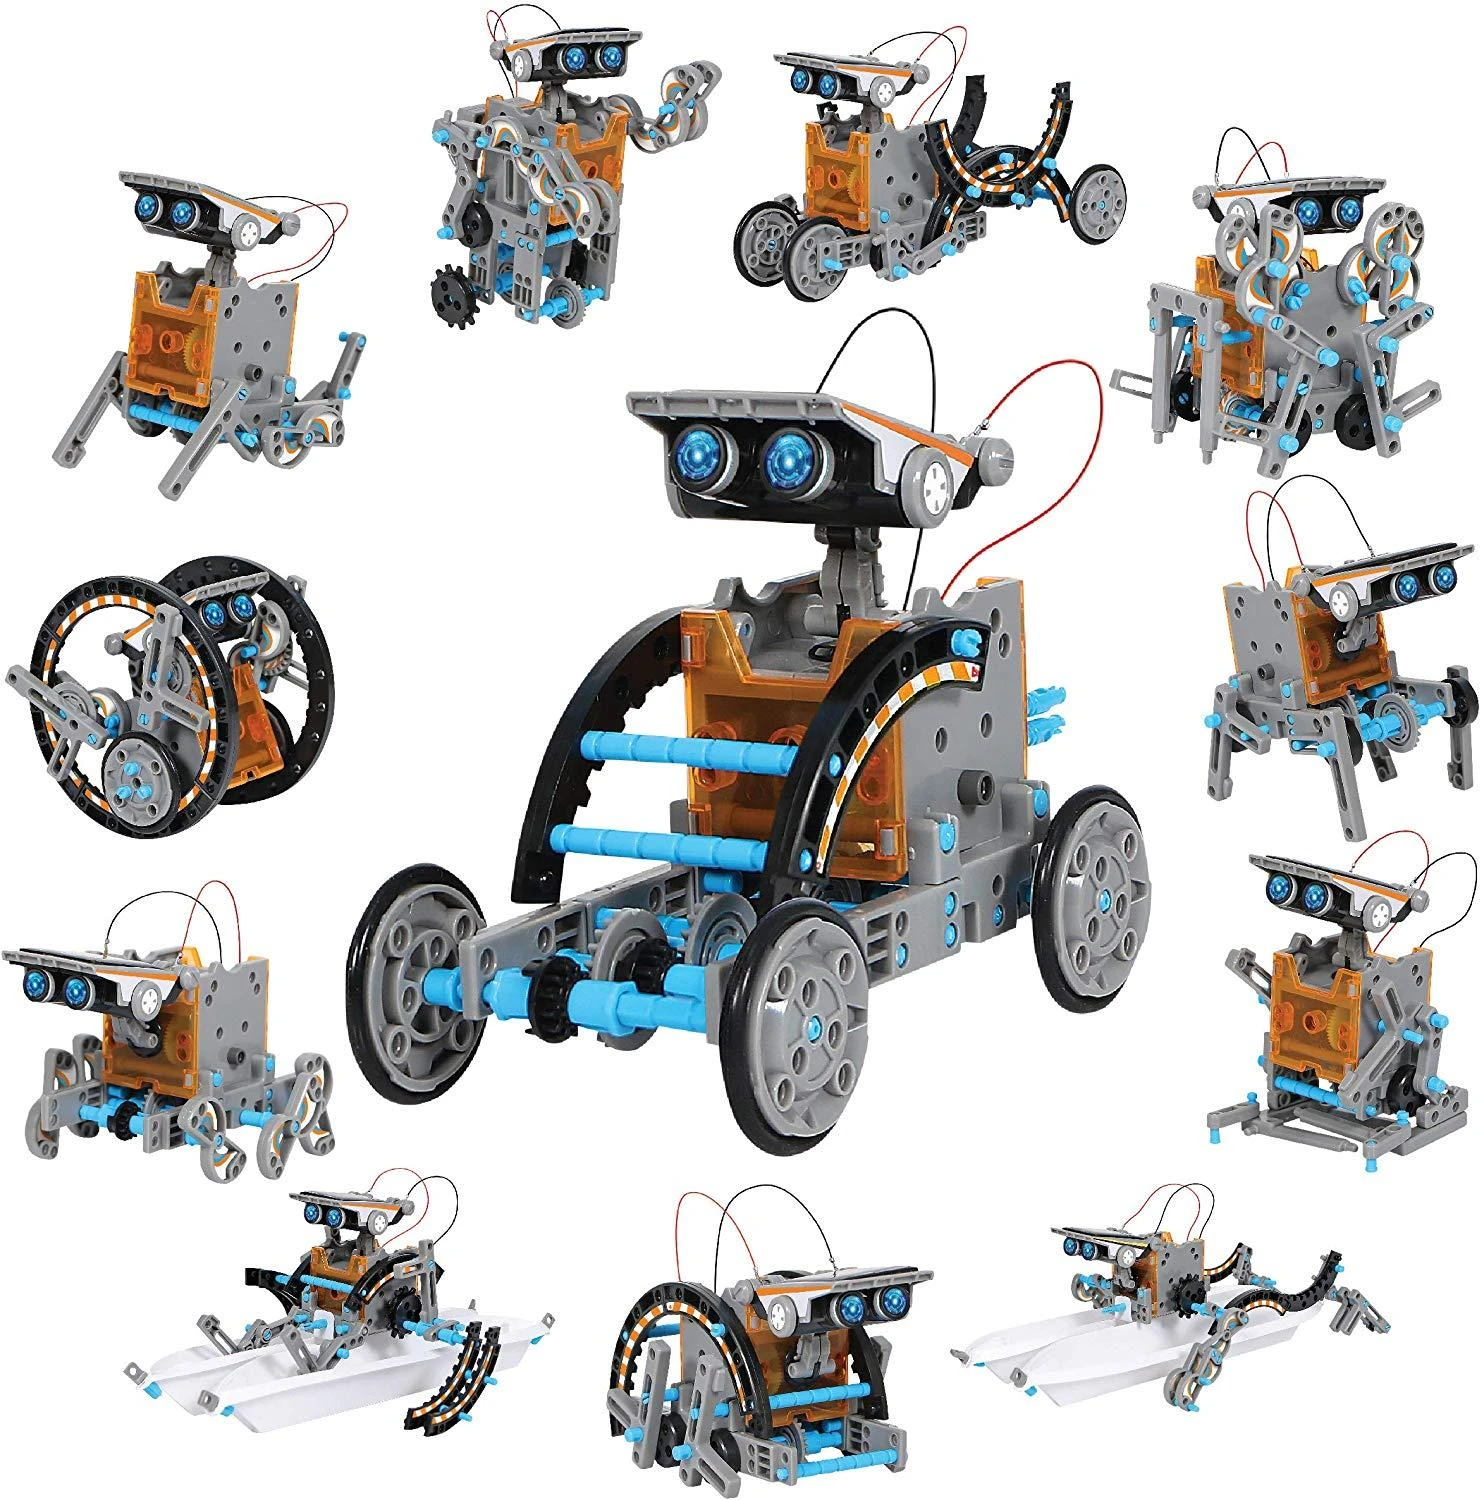 Kids Mindblown STEM 12-in-1 Solar Robot Creation 190-Piece Kit with Working Solar Powered Motorized Engine and Gears